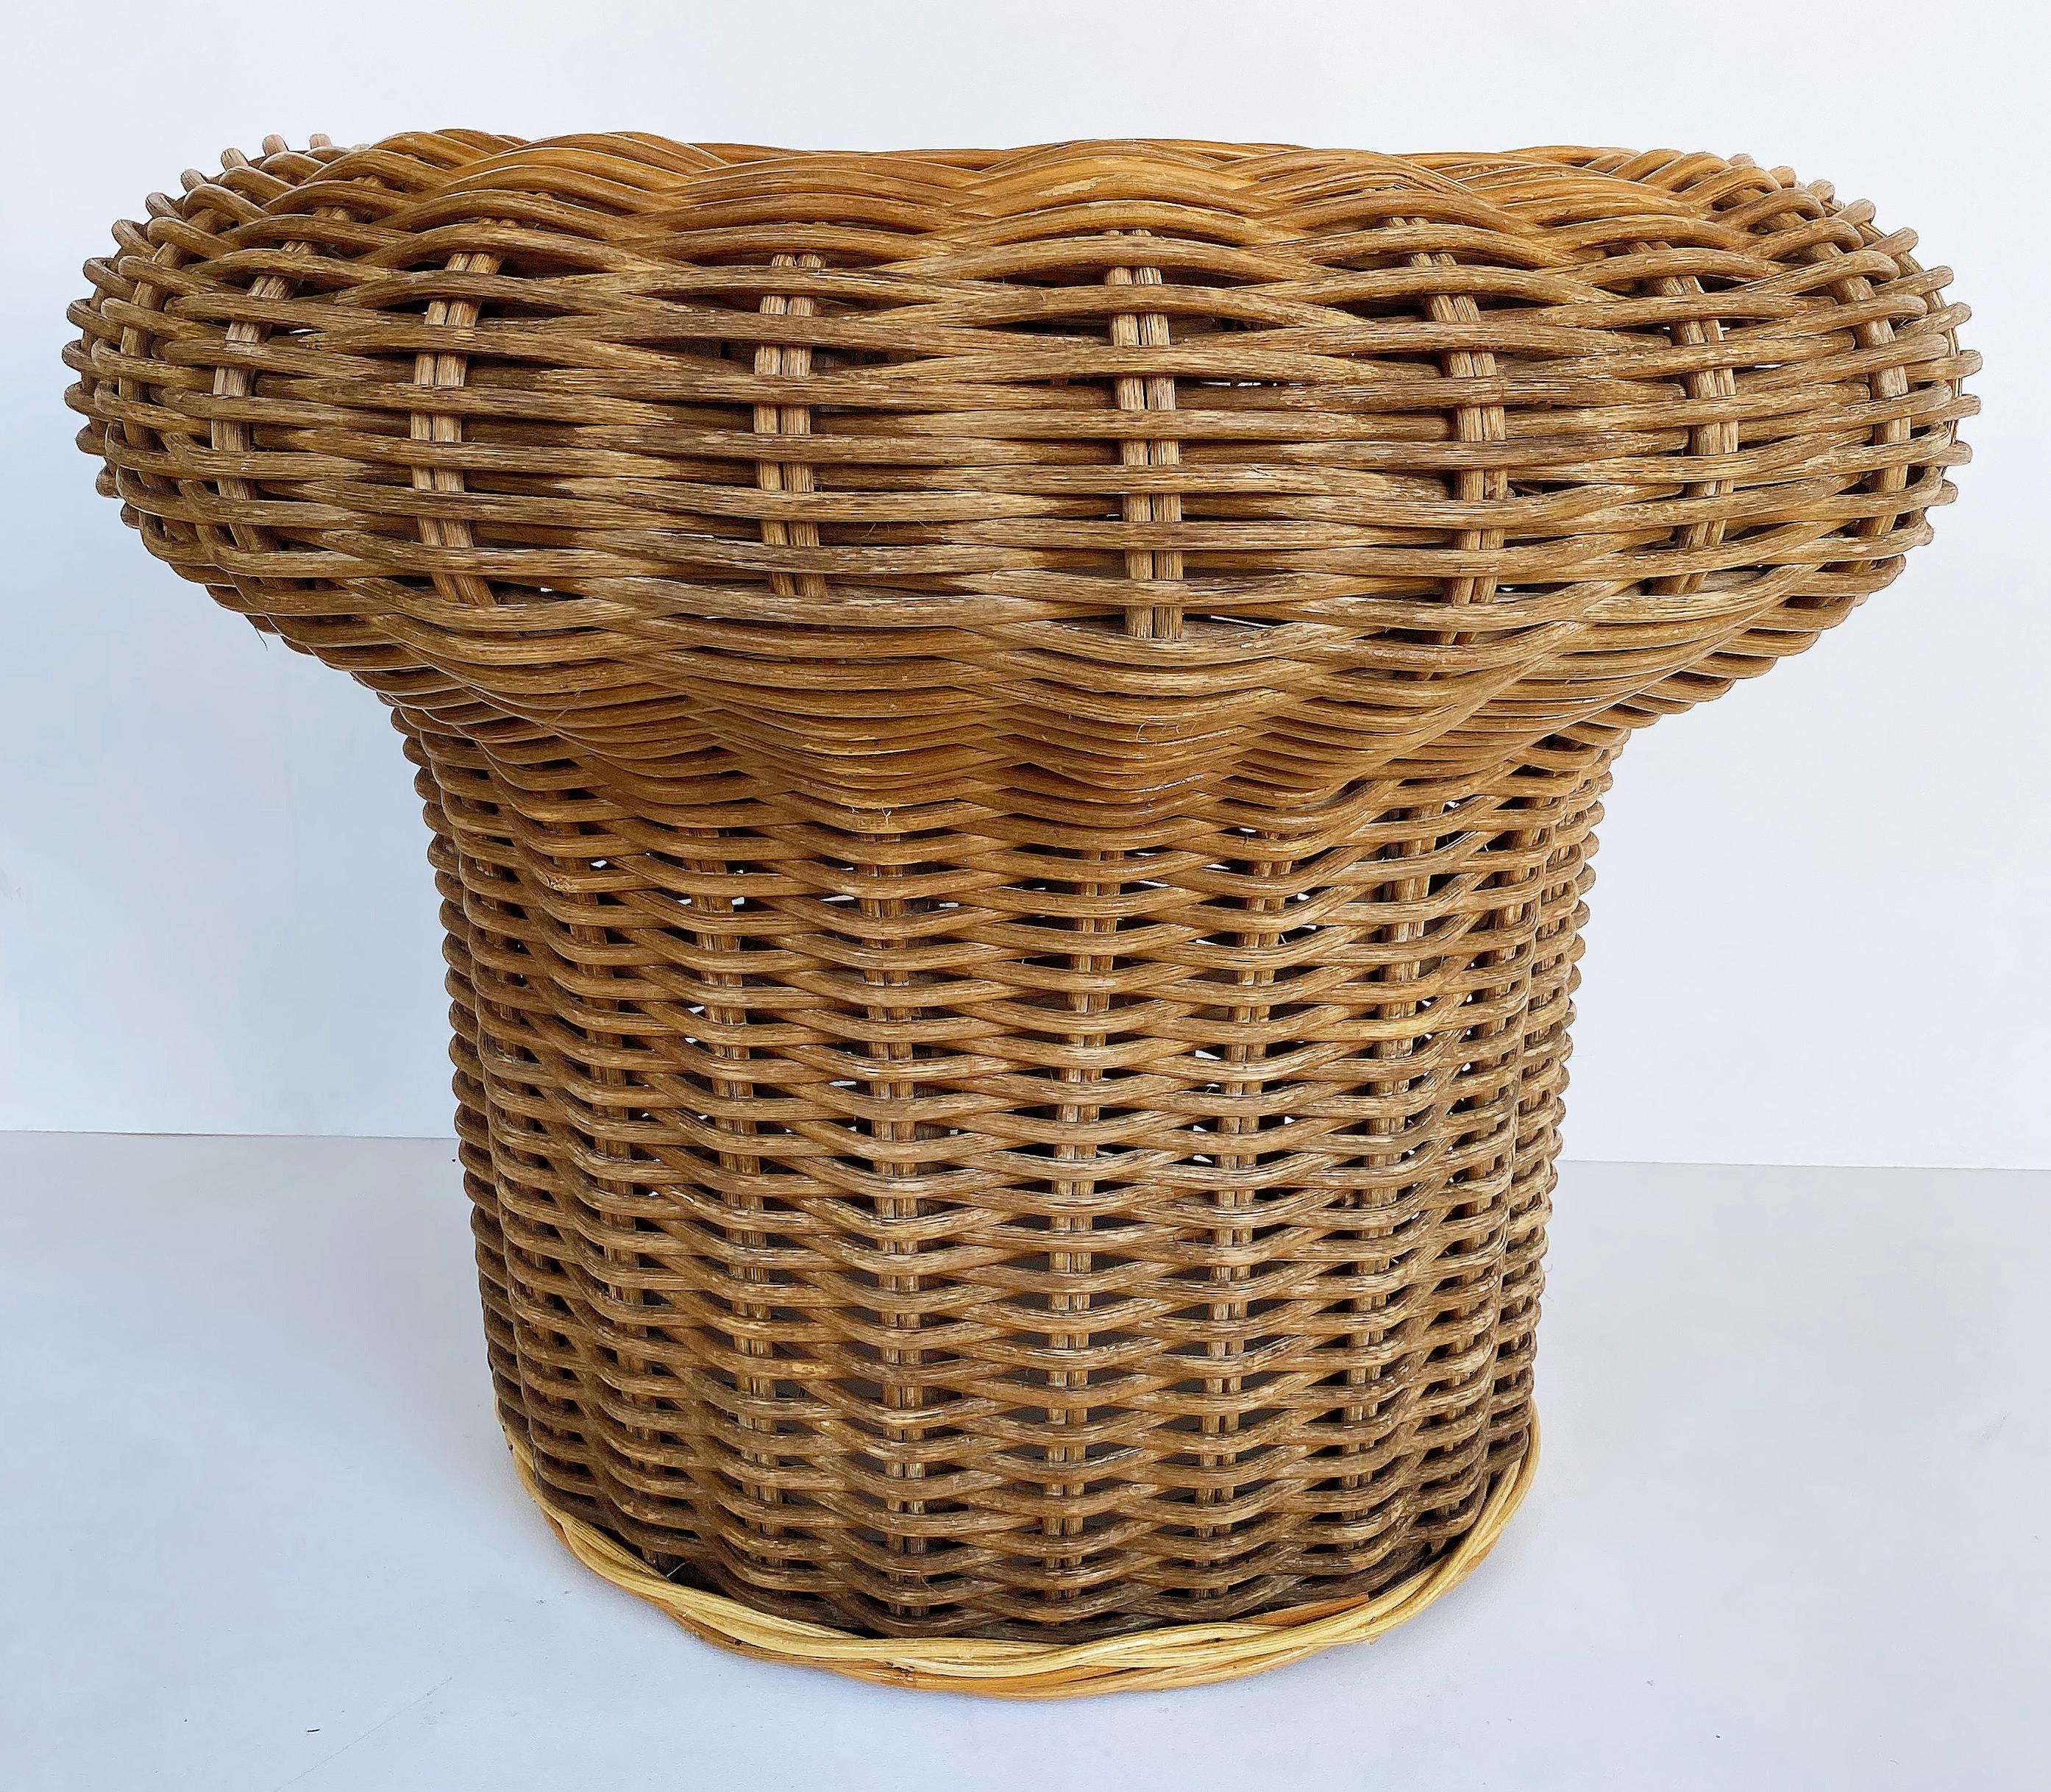 Vintage Woven rattan round Ottoman/Pouf or side table

Offered for sale is a vintage woven rattan side table or pouf ottoman. A cushion could be added to the top to use as a pouf or a round glass top could be set into the recess when used as a